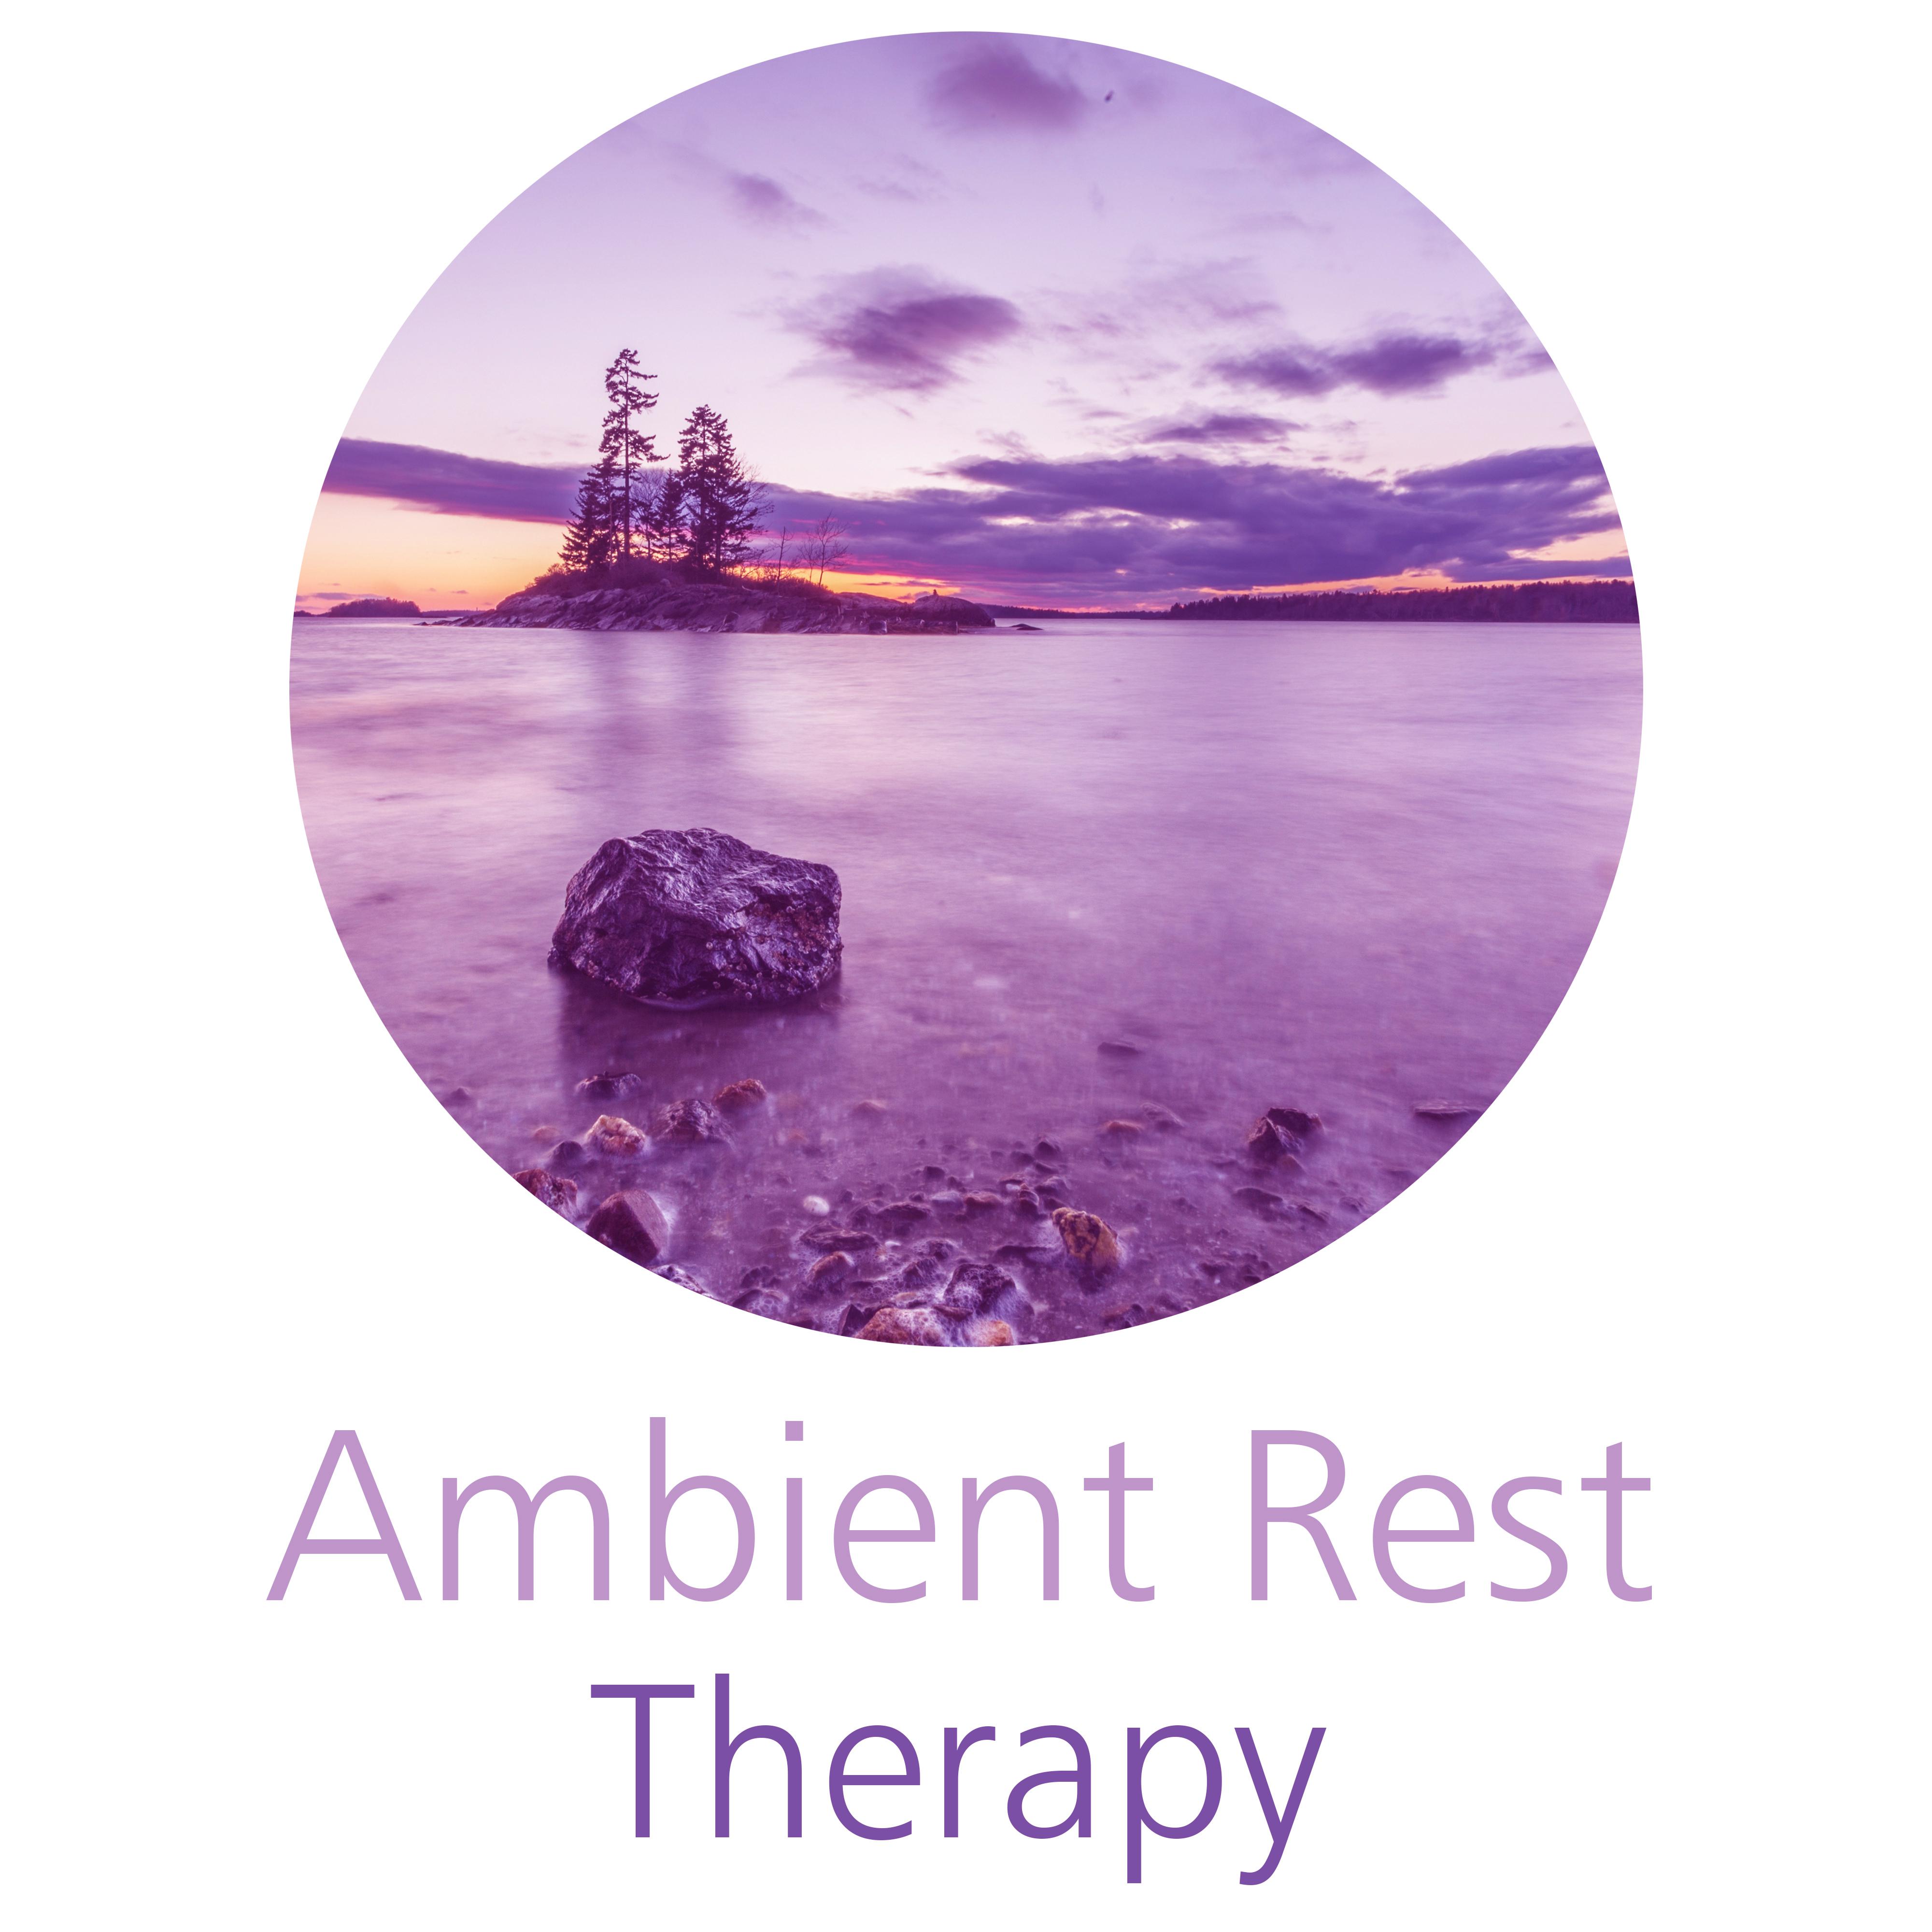 Ambient Rest Therapy – Pure Mind, Best Relaxation, Stress Relief, Soft Nature Sounds to Calm Down, Harmony, Inner Spirit, Deep Sleep